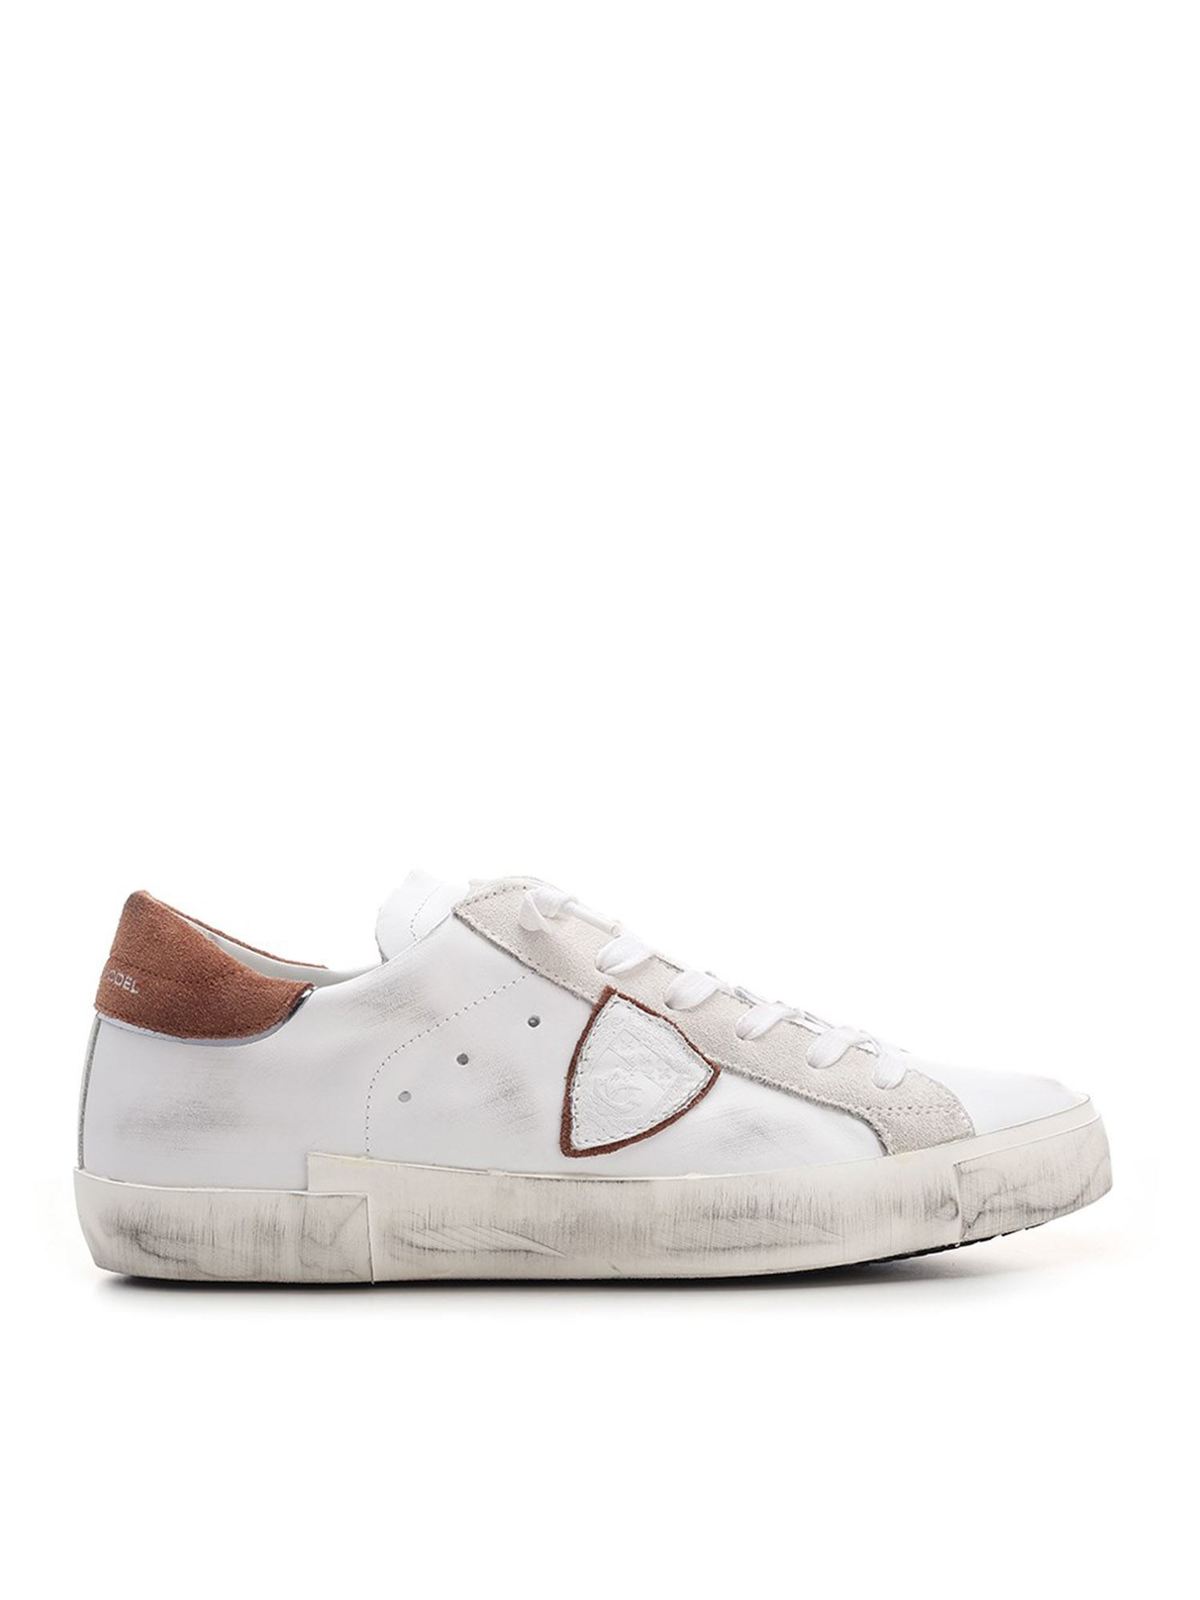 Philippe Model Logo Sneaker In White And Brown